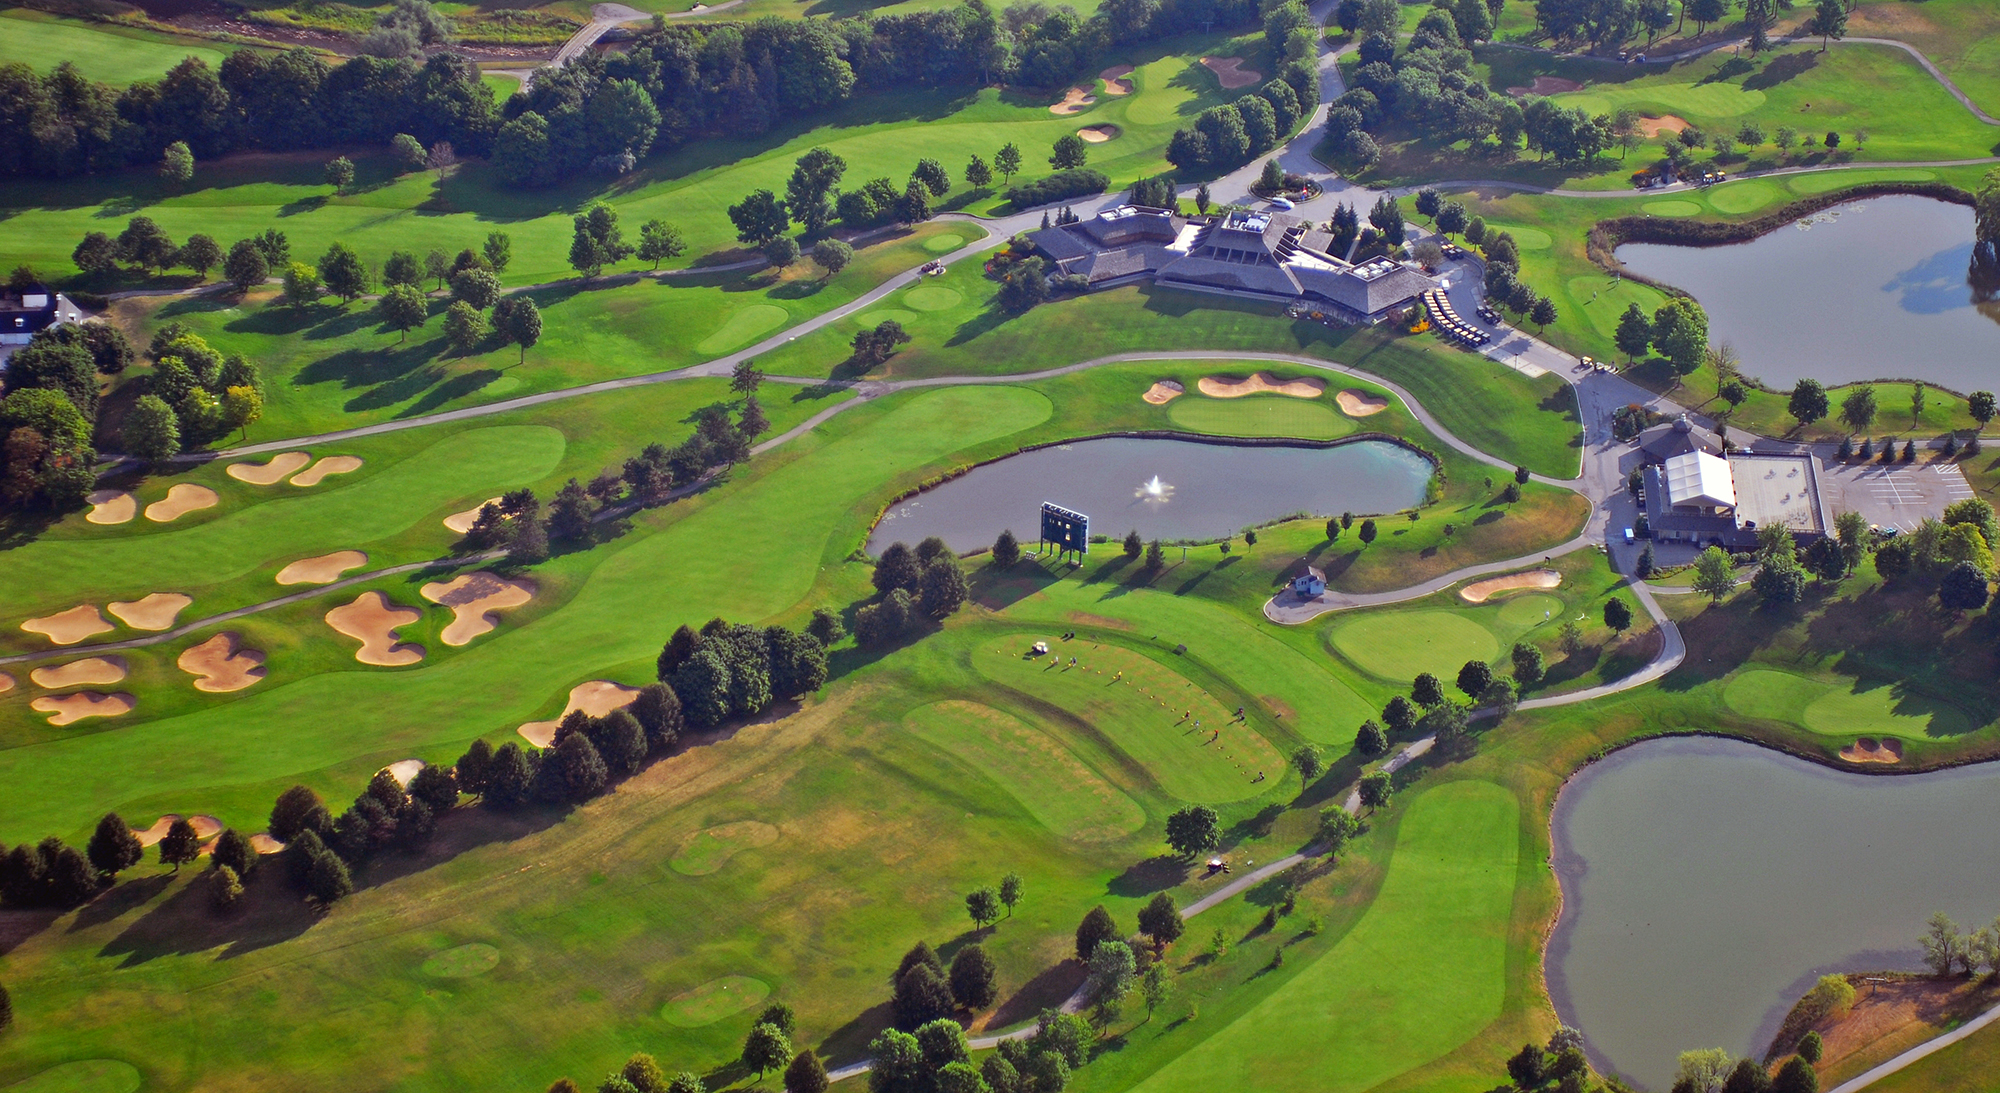 Top Considerations for a Well-Managed Country Club